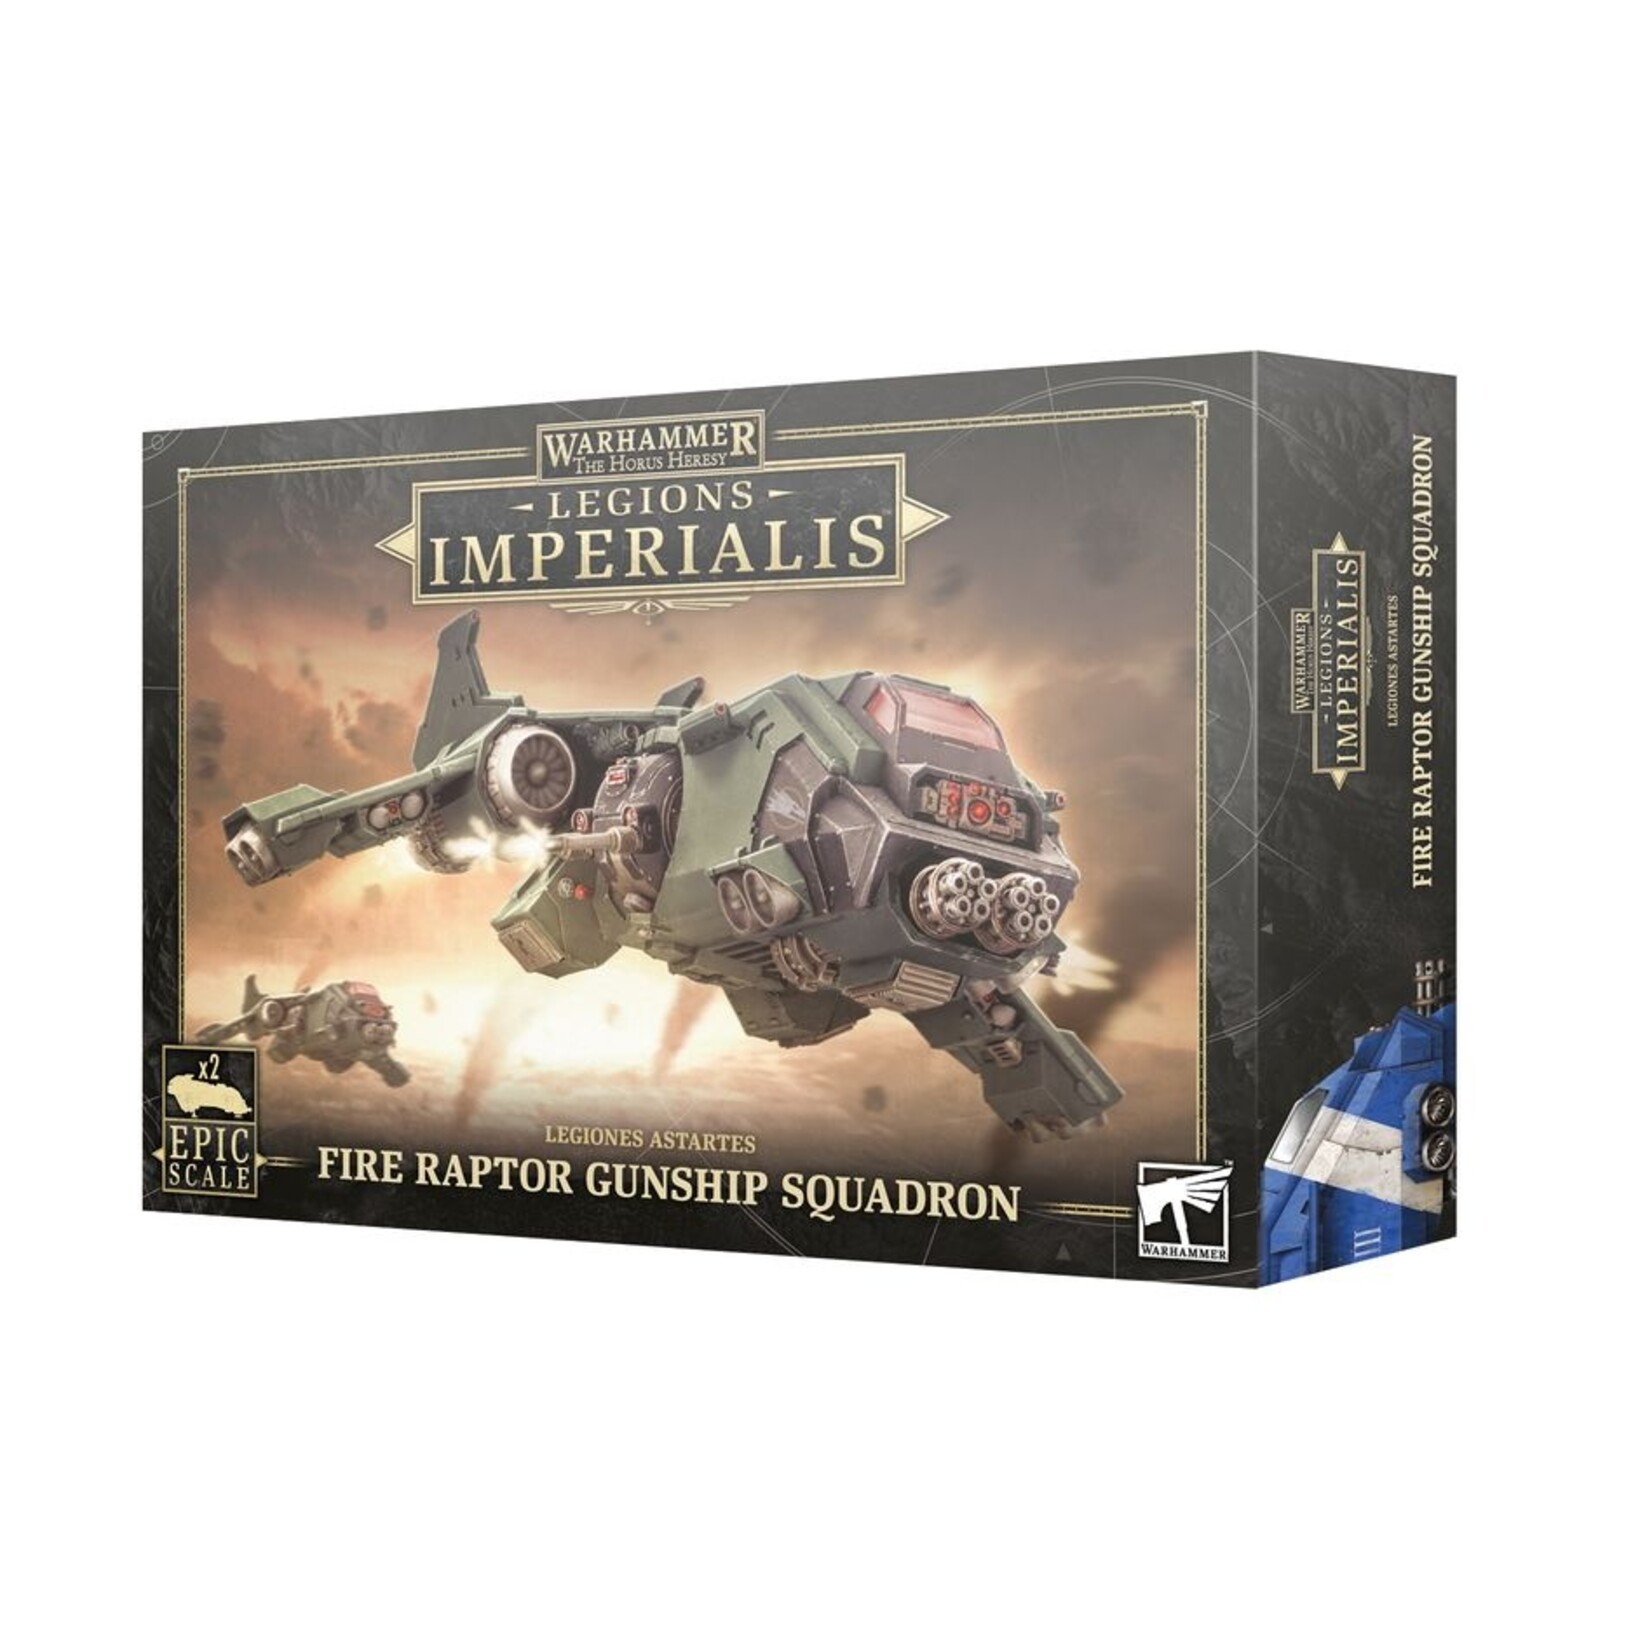 Warhammer: Legions Imperialis (Preorder: releases 29/06) Legions Imperialis: Fire Raptor Squadron